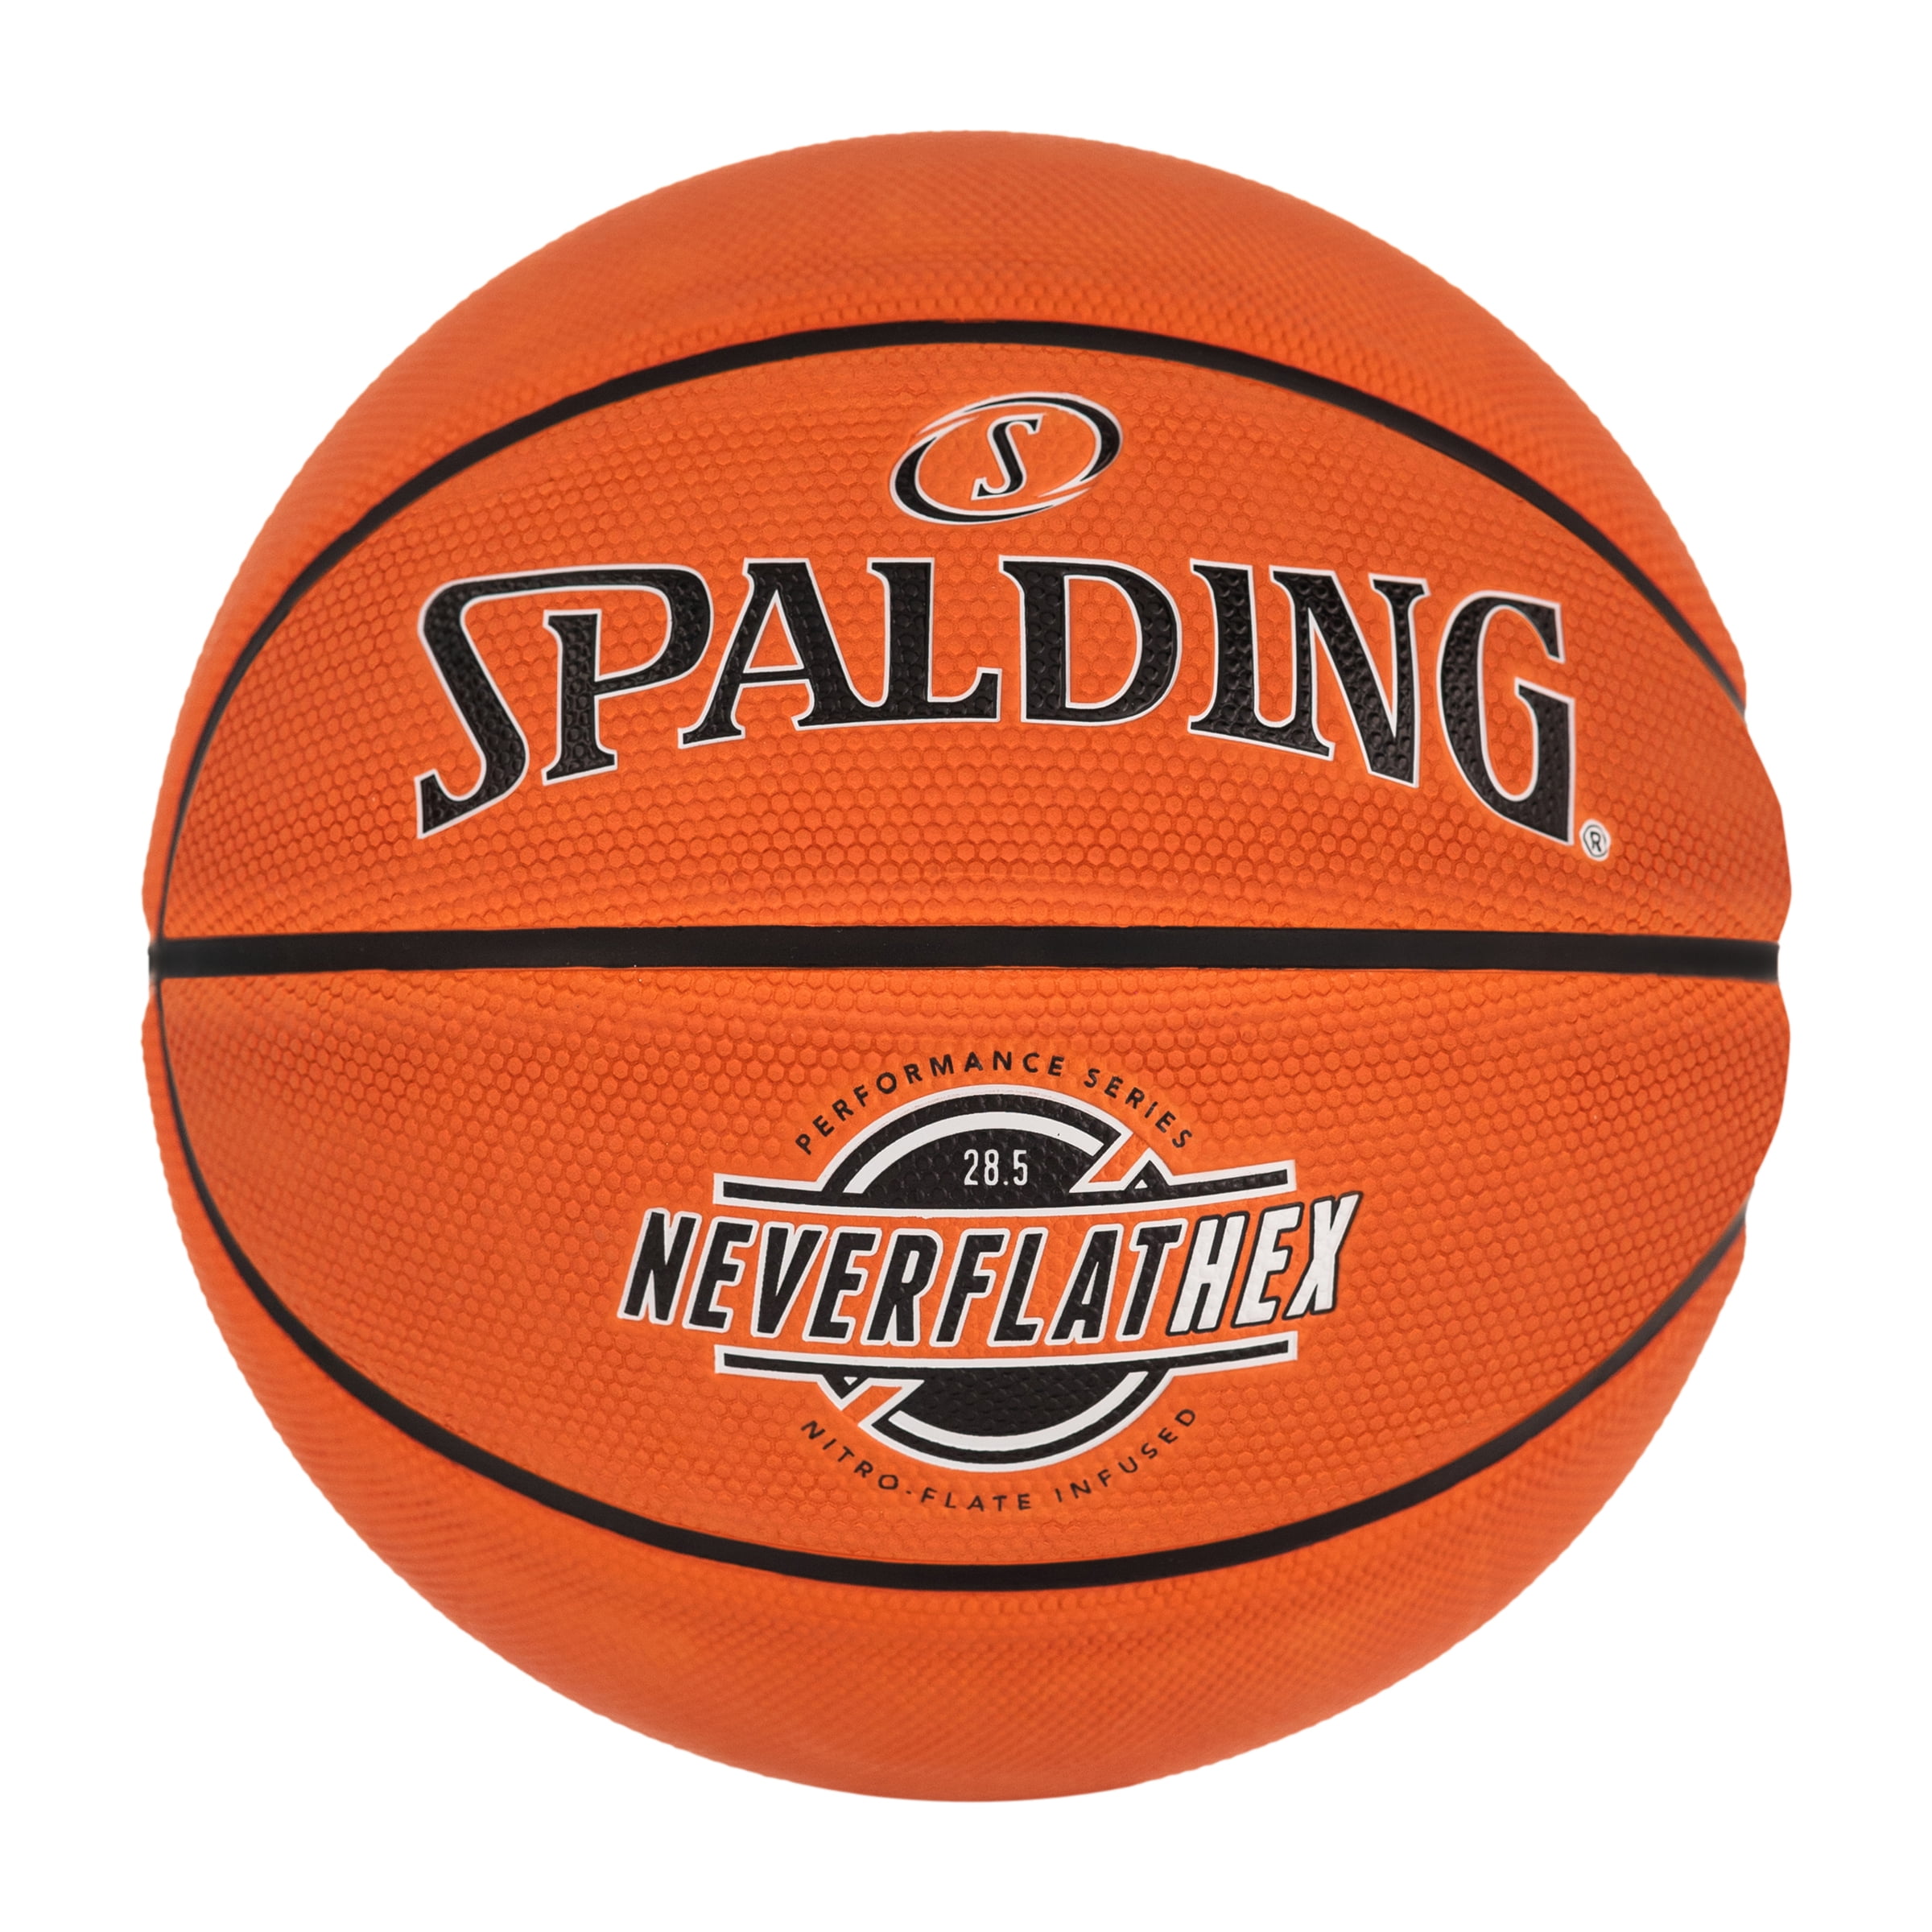 SPALDING TF-500 COMPOSITE LEATHER BASKETBALL 28.5 INTERMEDIATE SIZE 